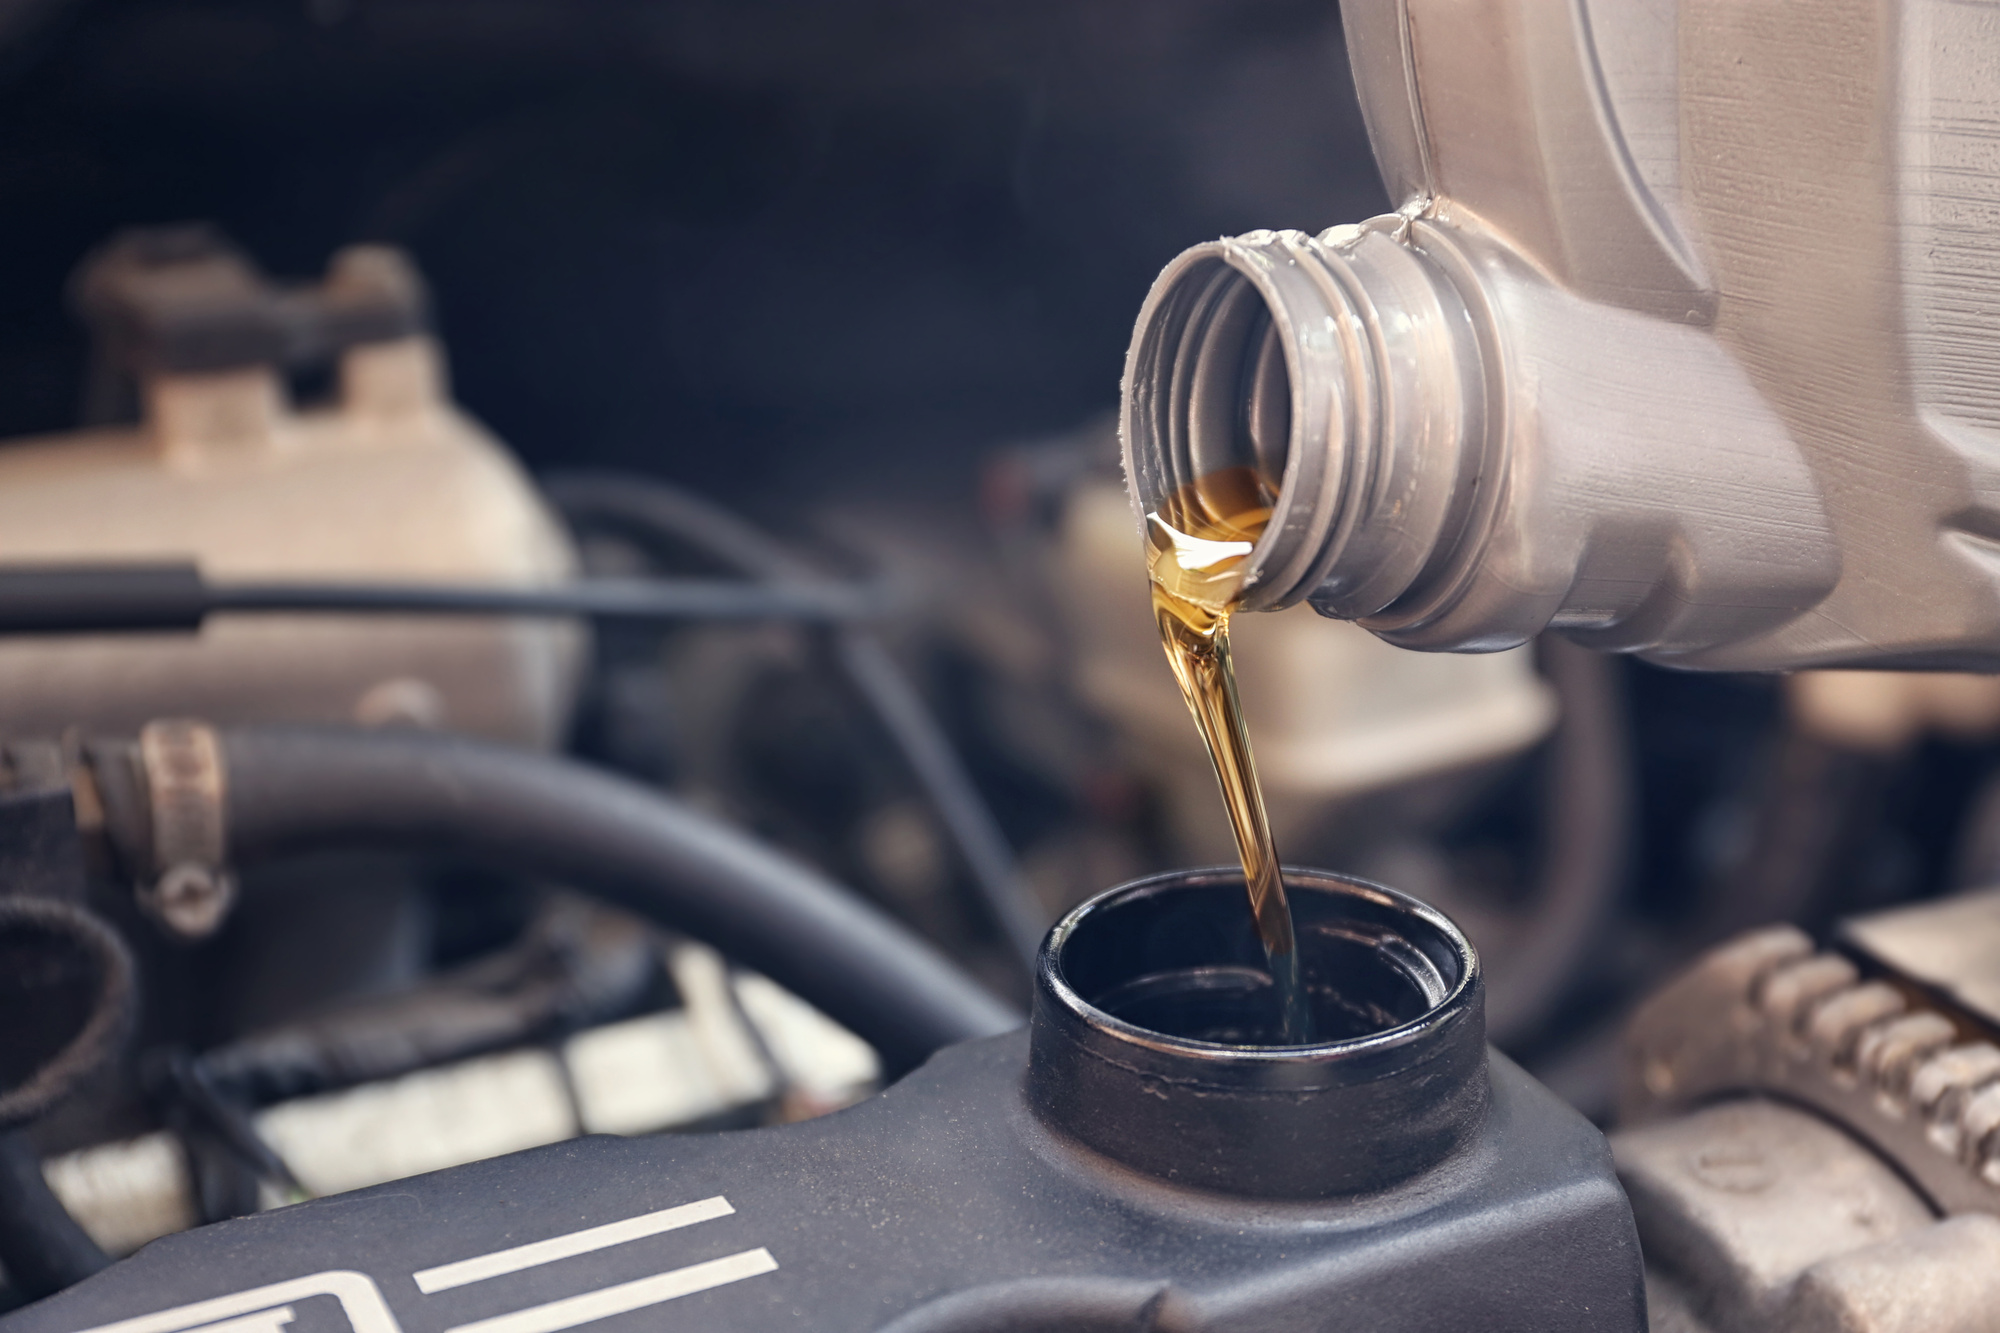 pouring oil into car